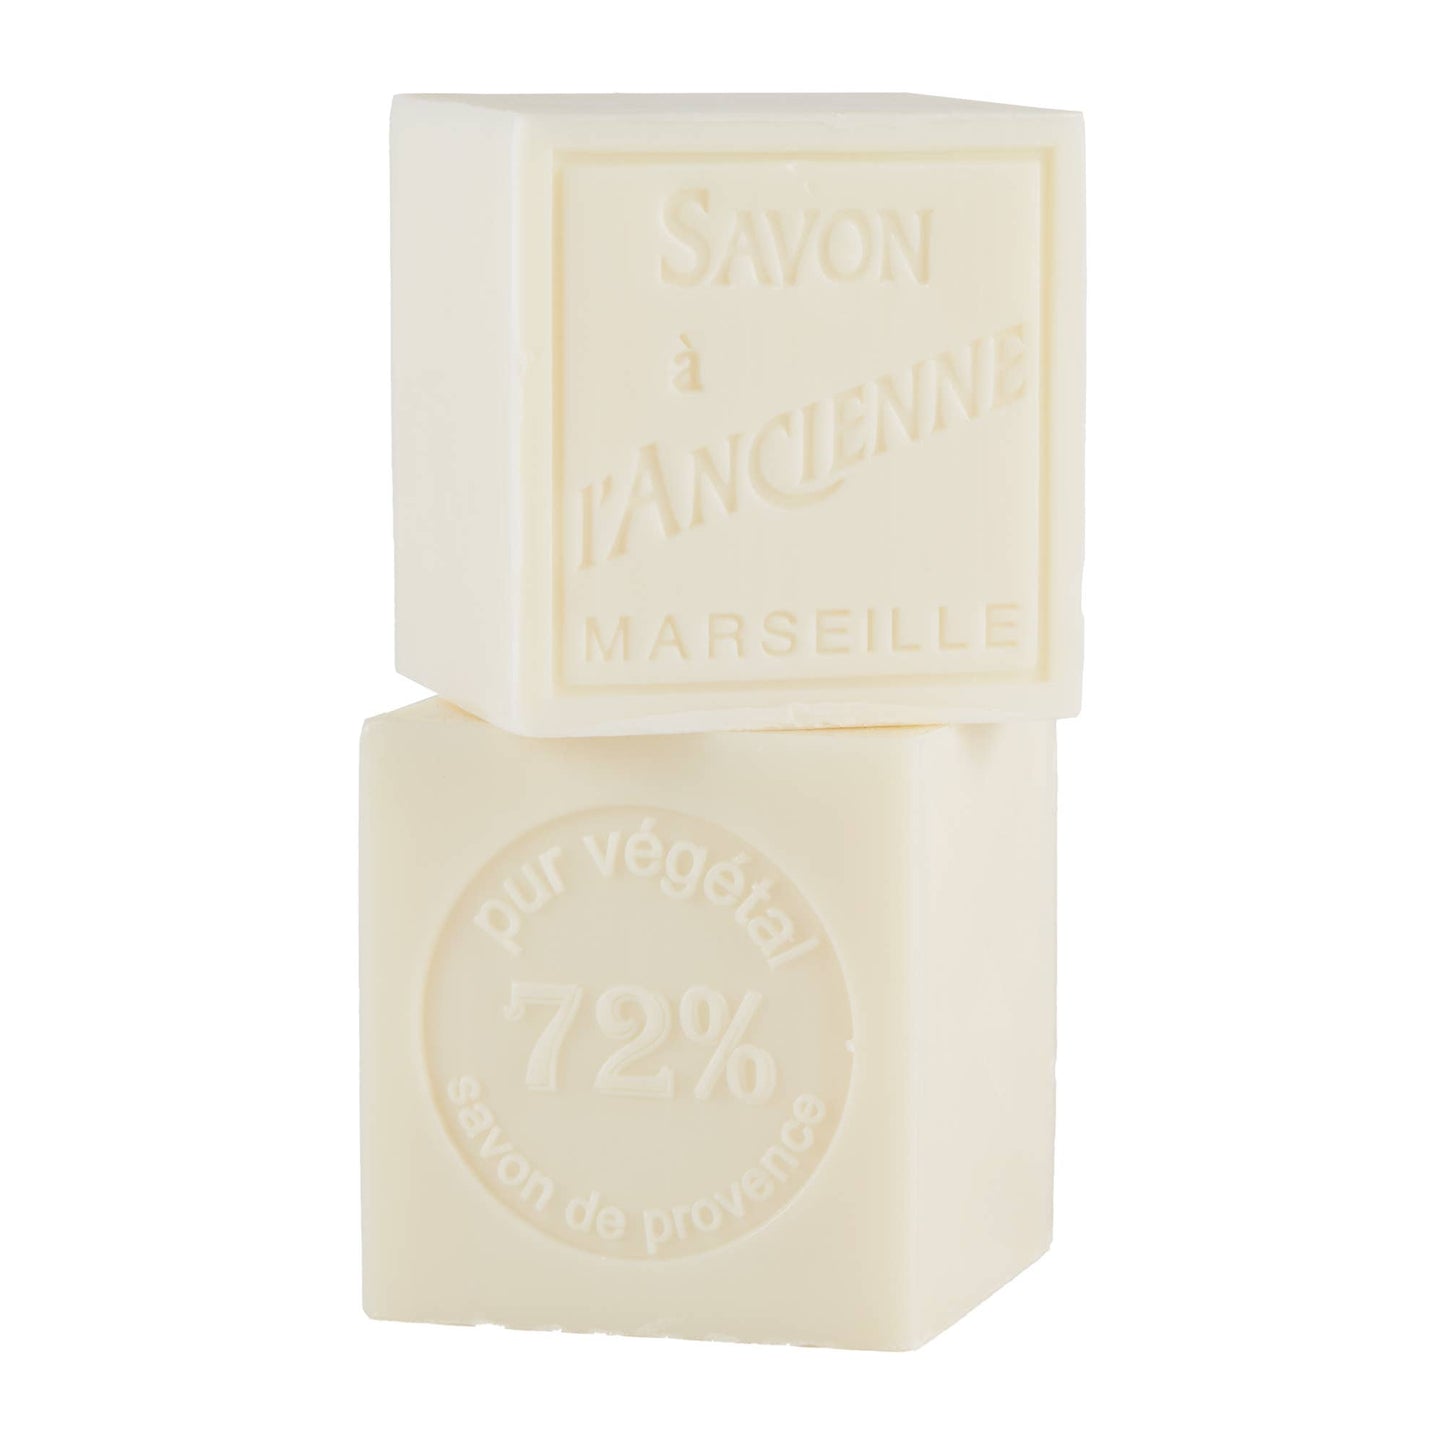 French Soap Cube - Made in Marseille, France